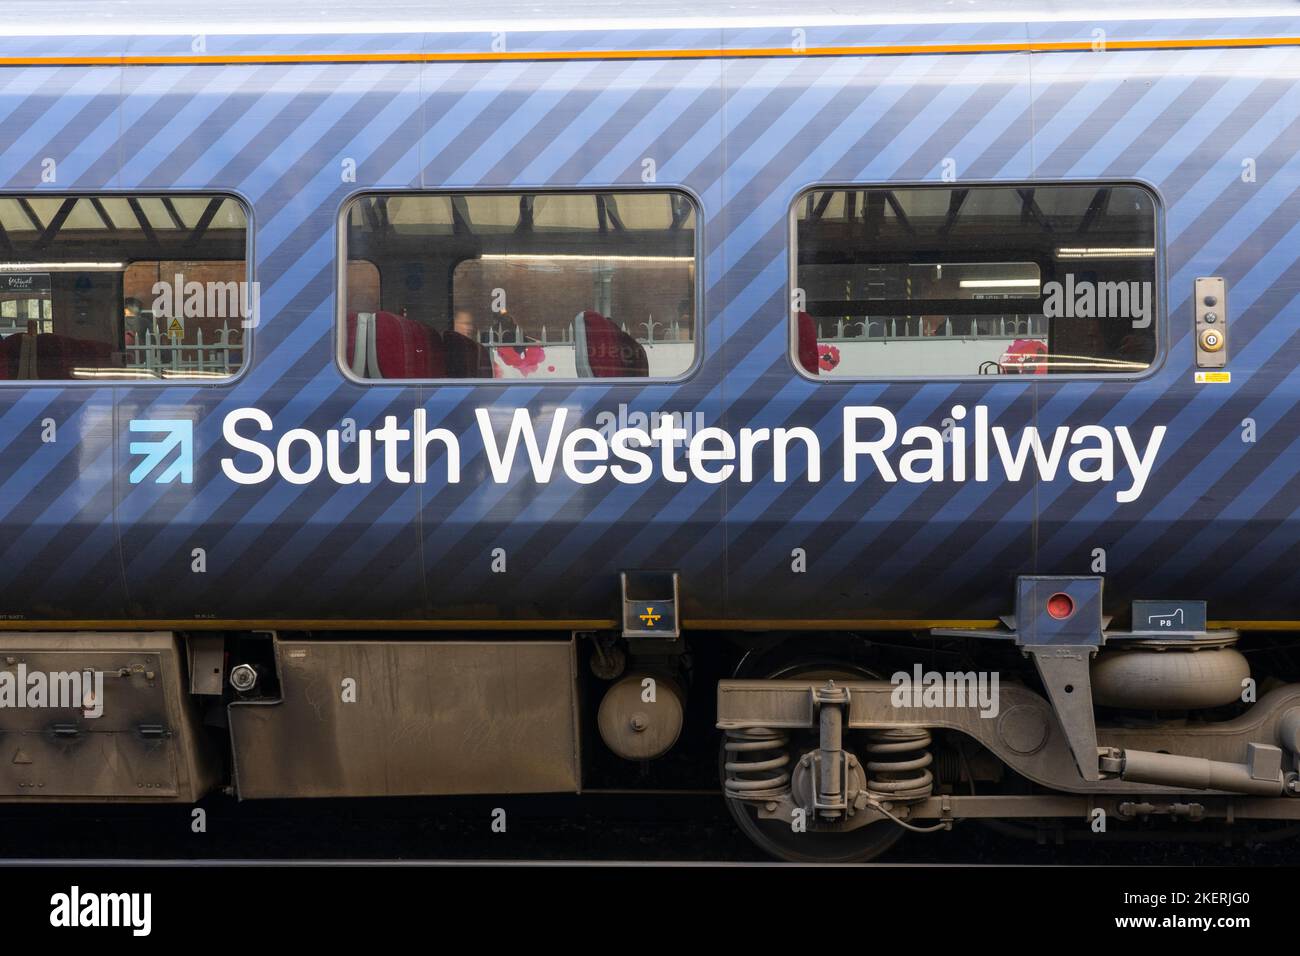 South Western Railway logo on the side of a passenger train coach at Basingstoke train station. England. Concept: rail franchise, ticket prices Stock Photo